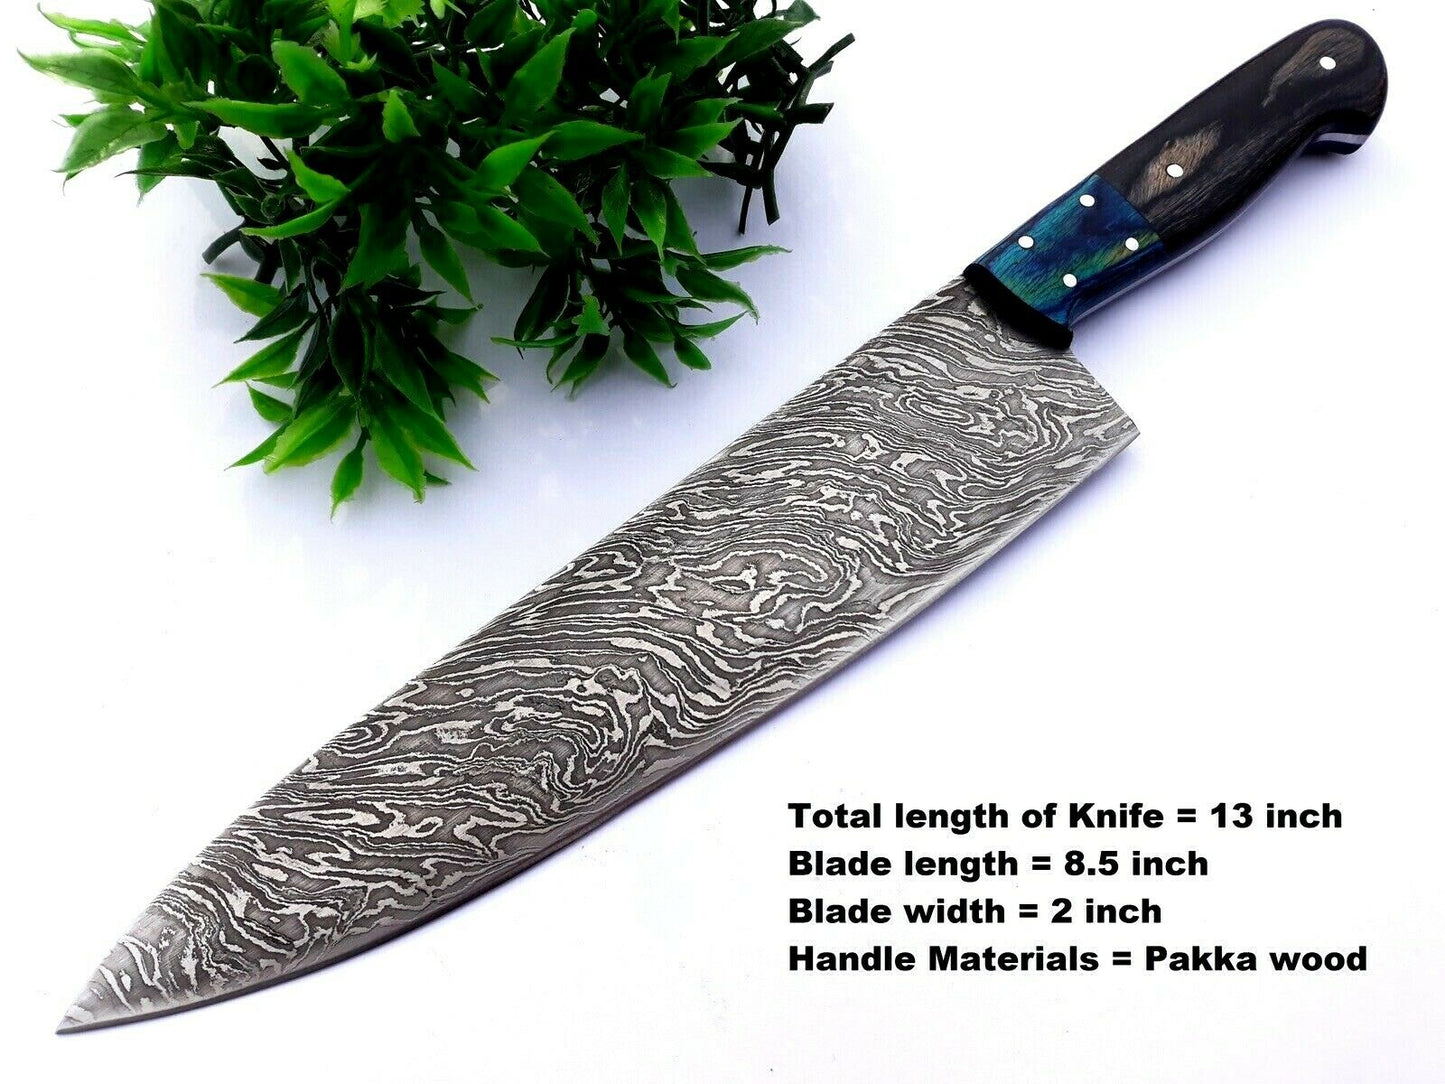 Handmade Damascus Steel Kitchen Knife Set 167 Layers Full Tang With Leather Bag